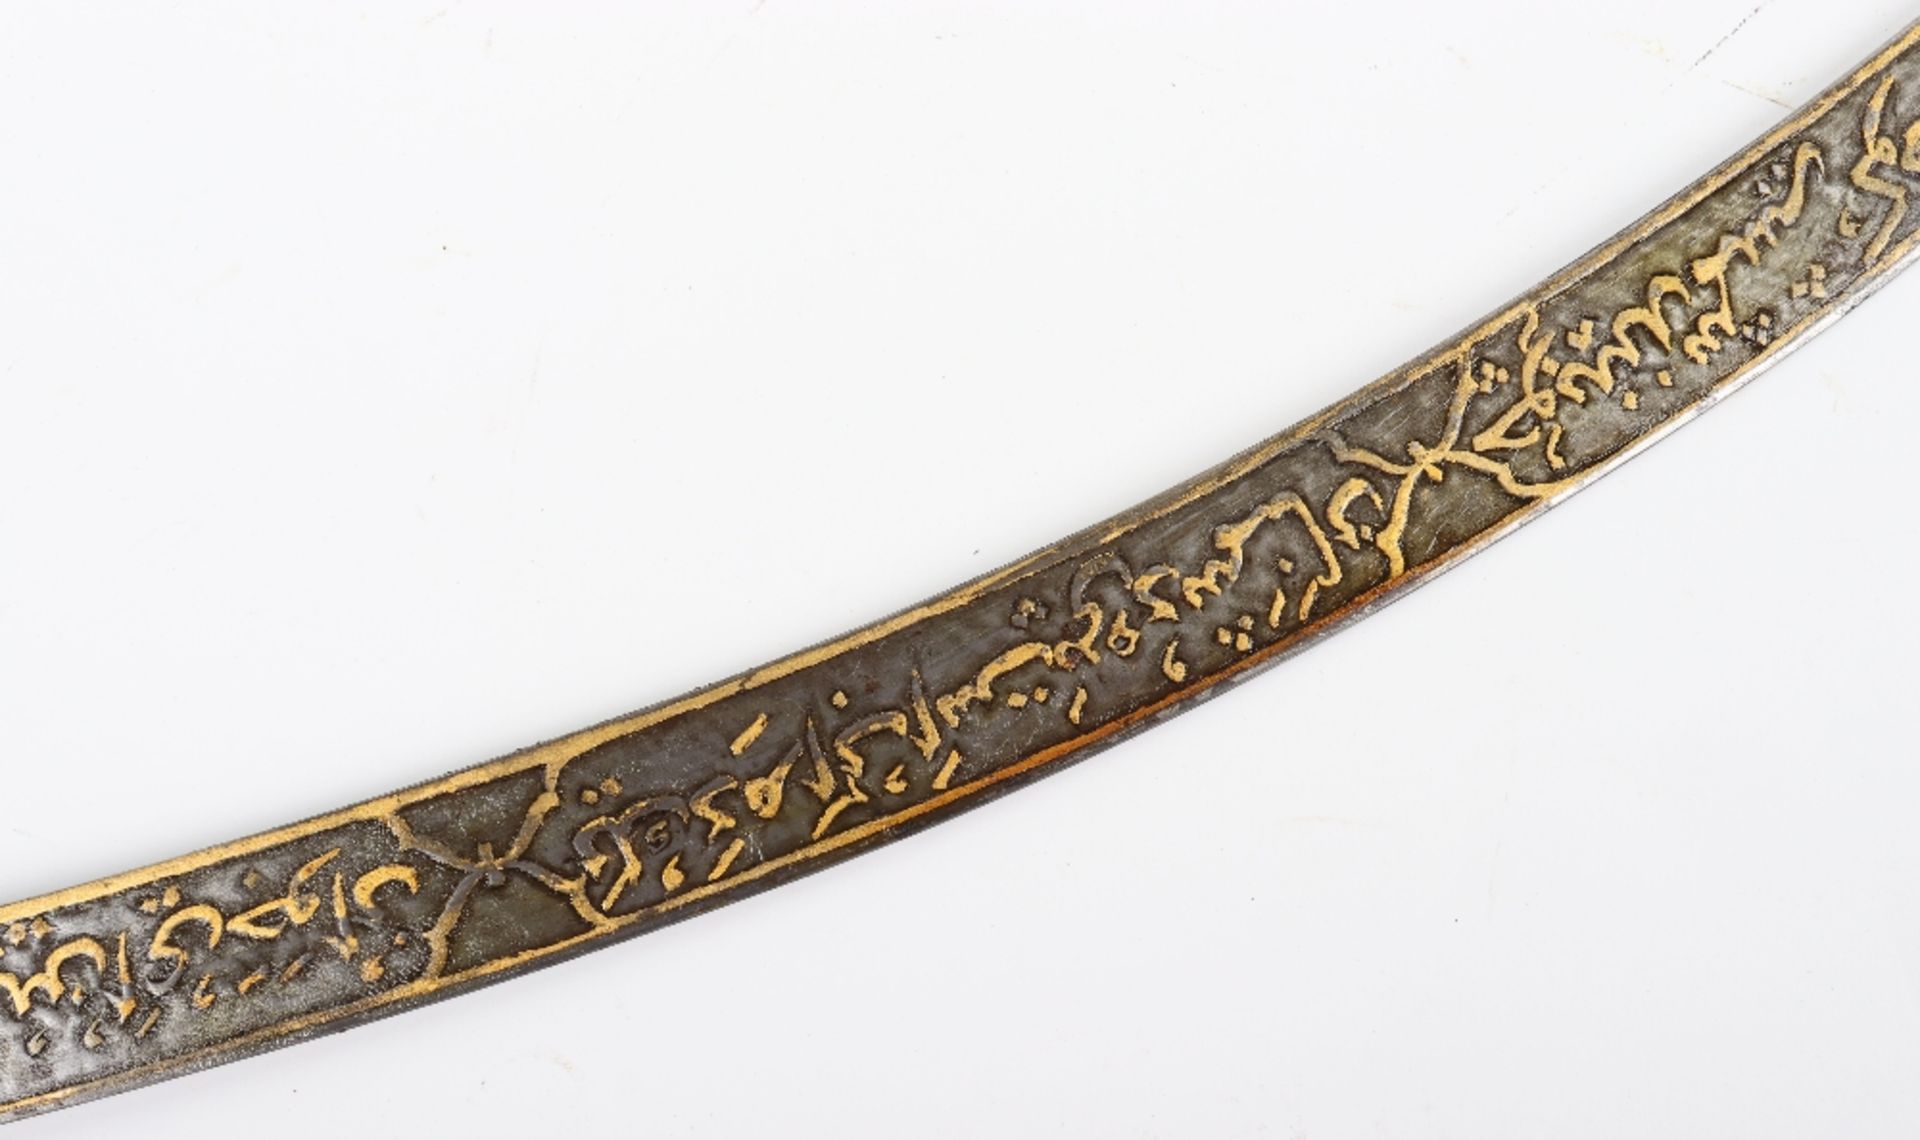 ^ North Indian Sword Shamshir Built for an Officer, Second Half of the 19th Century - Image 12 of 15